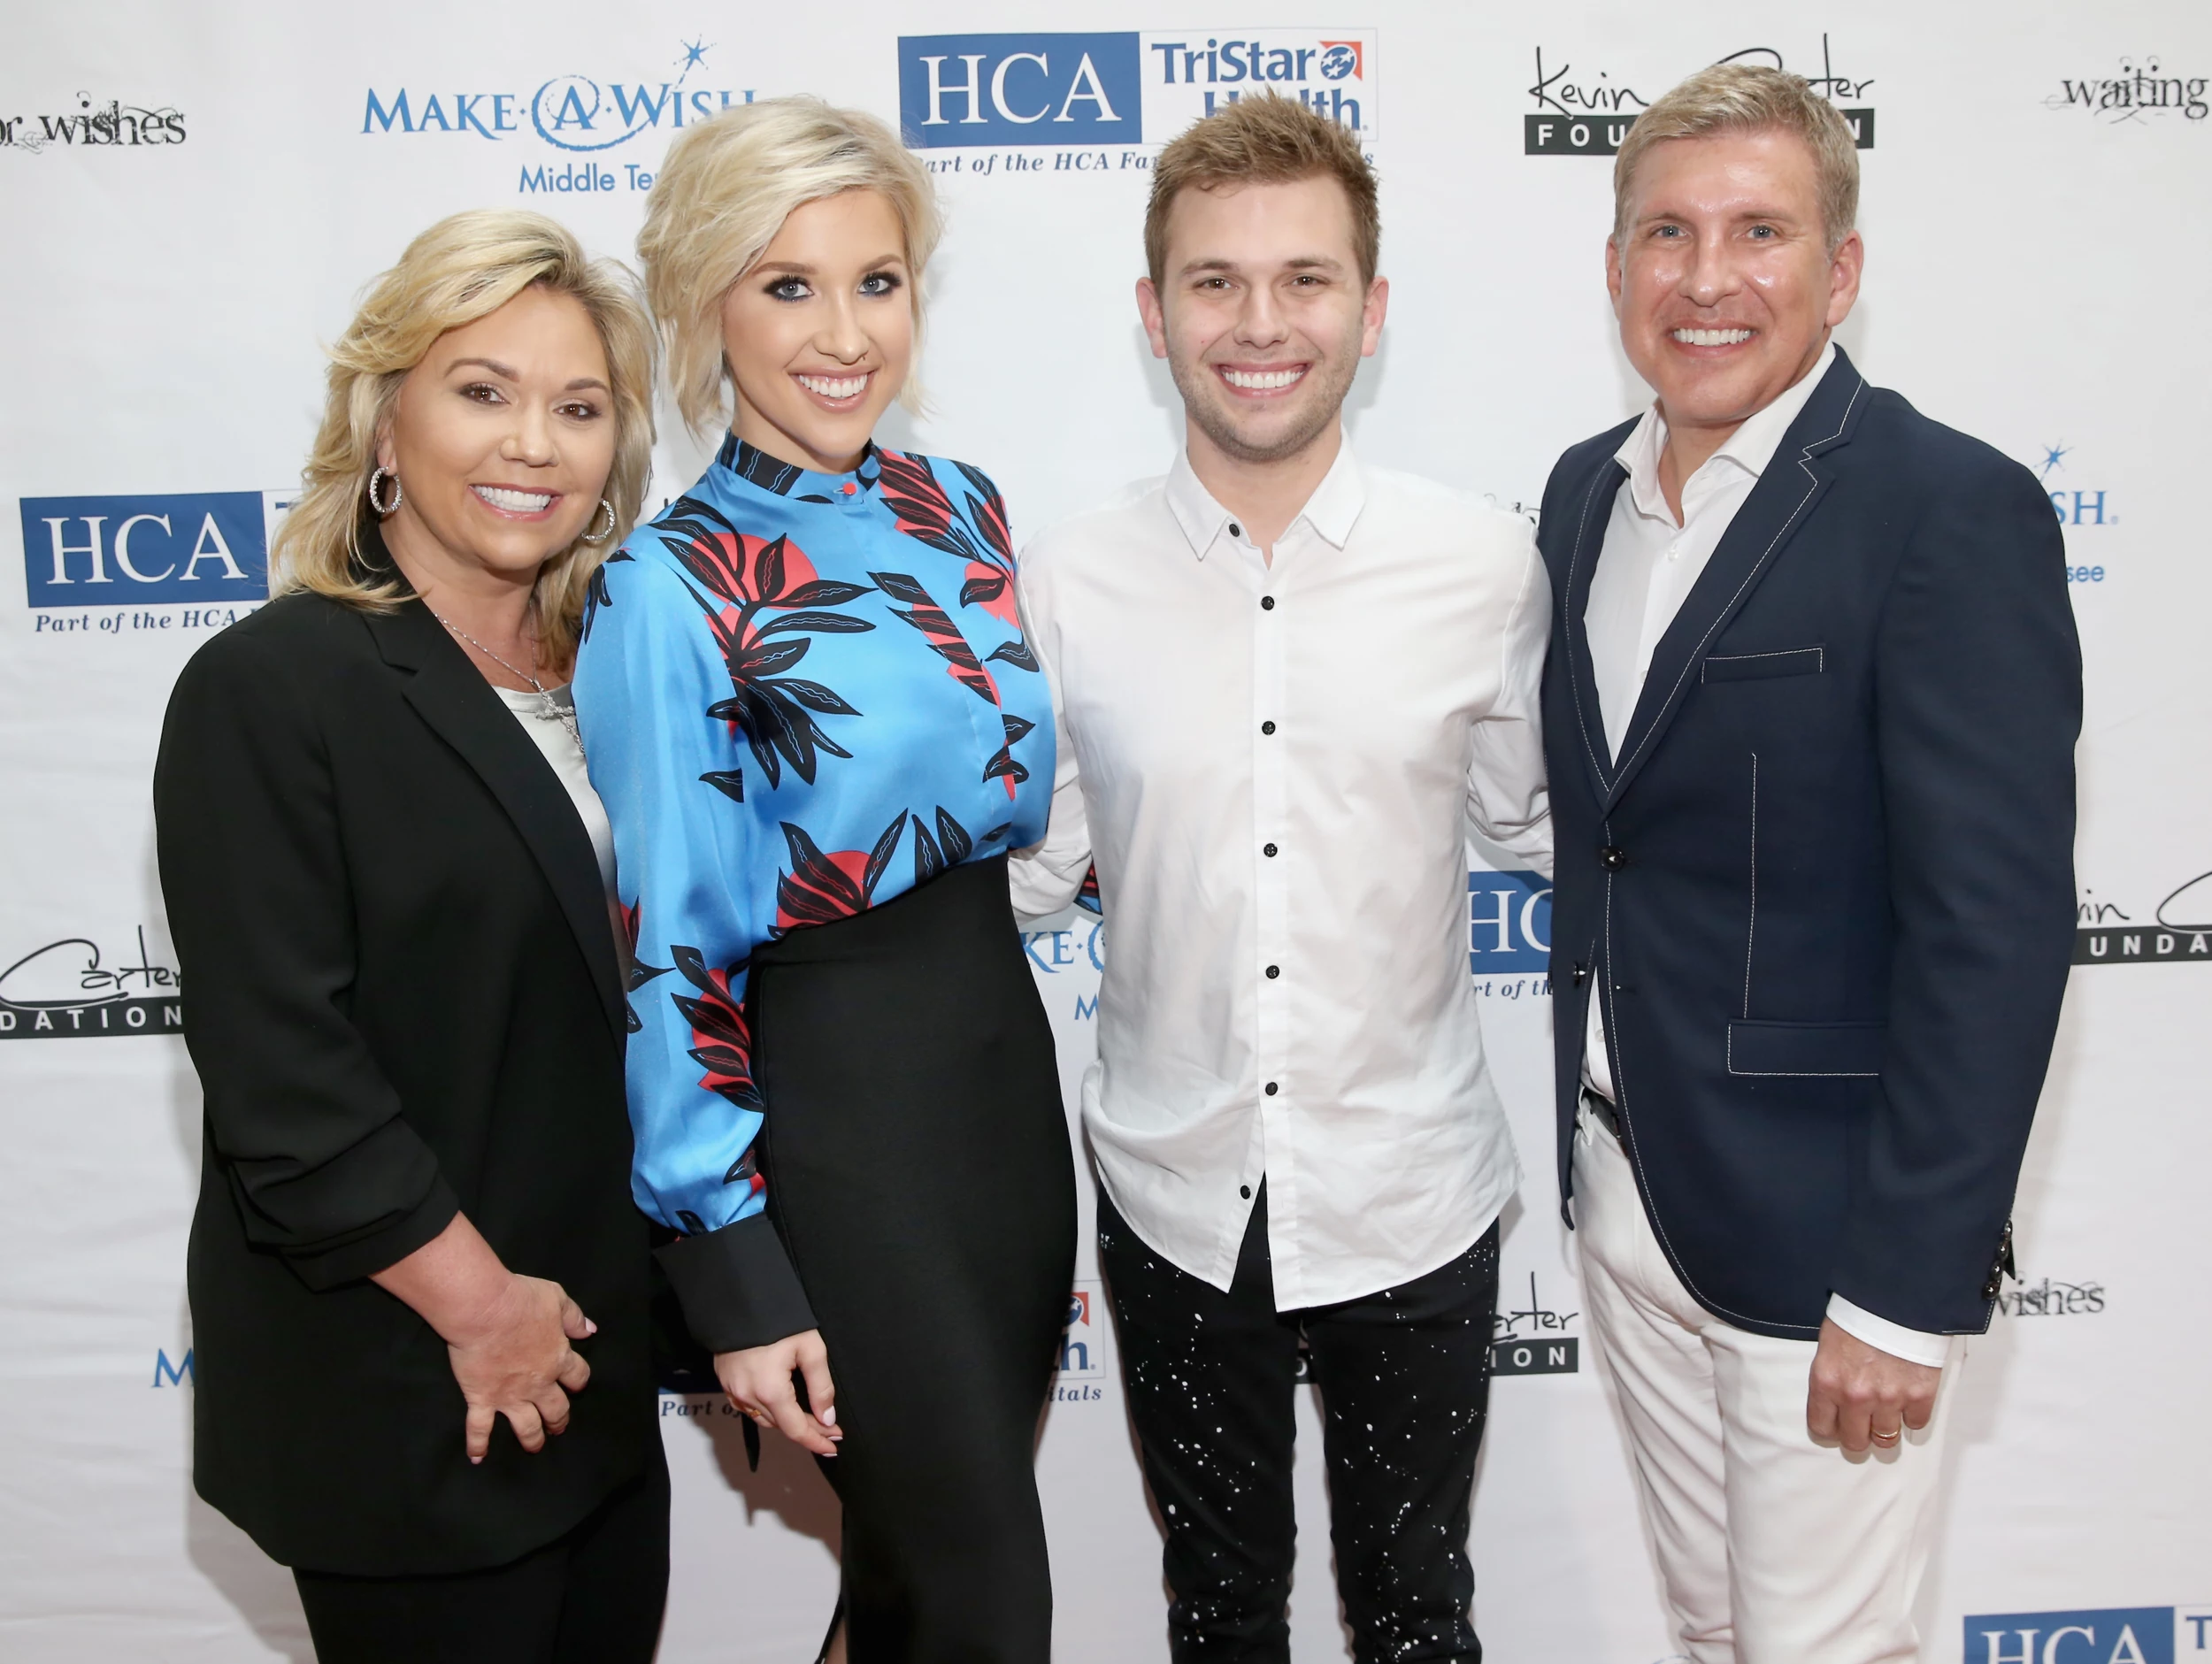 Todd and Julie from Chrisley Knows Best Are Headed to Jail